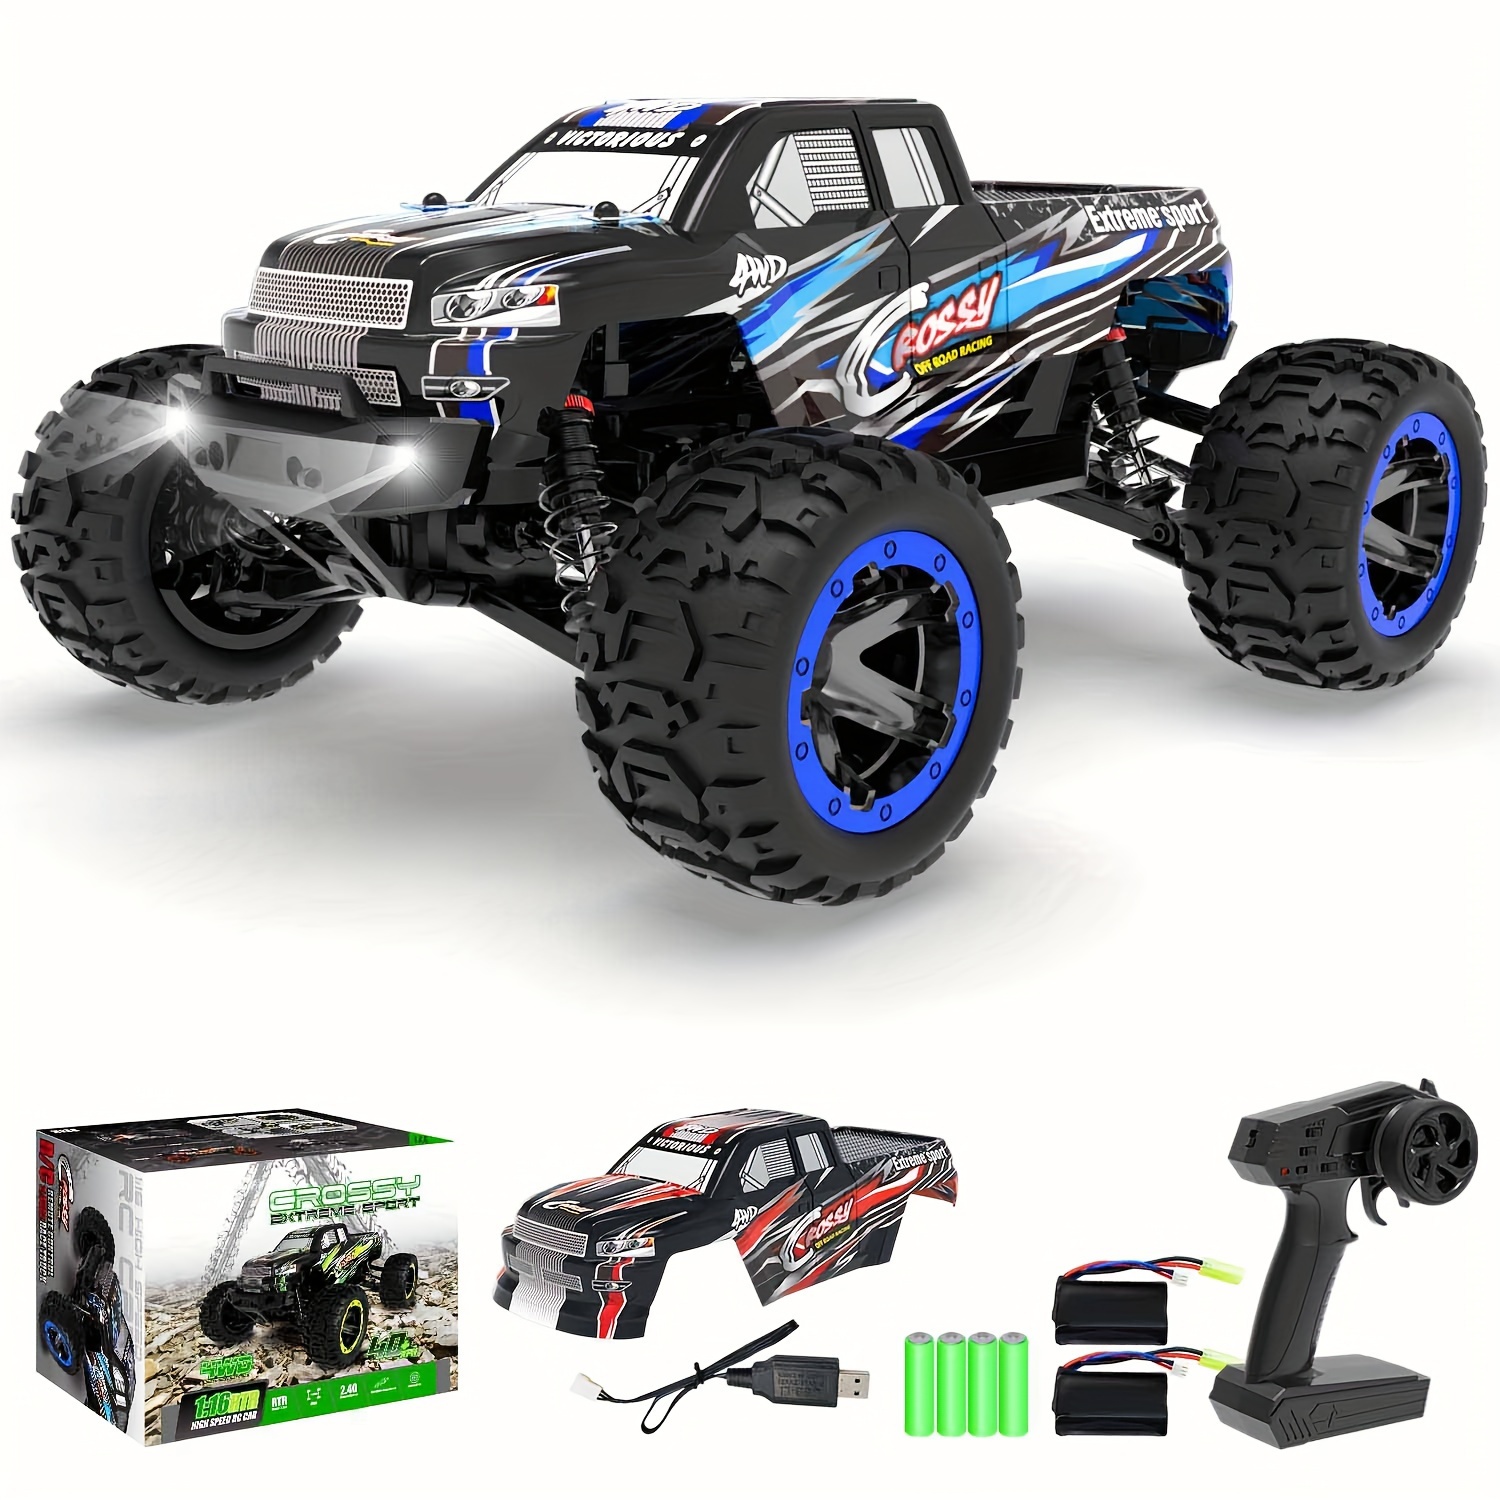 

Rc Car, 1:16 Scale All Terrain Monster Truck, 30mph 4wd Off Road Fast Remote Control Toy 2.4ghz High Speed Electric Vehicle With 2 Rechargeable Batteries, Gift For Boys Adults